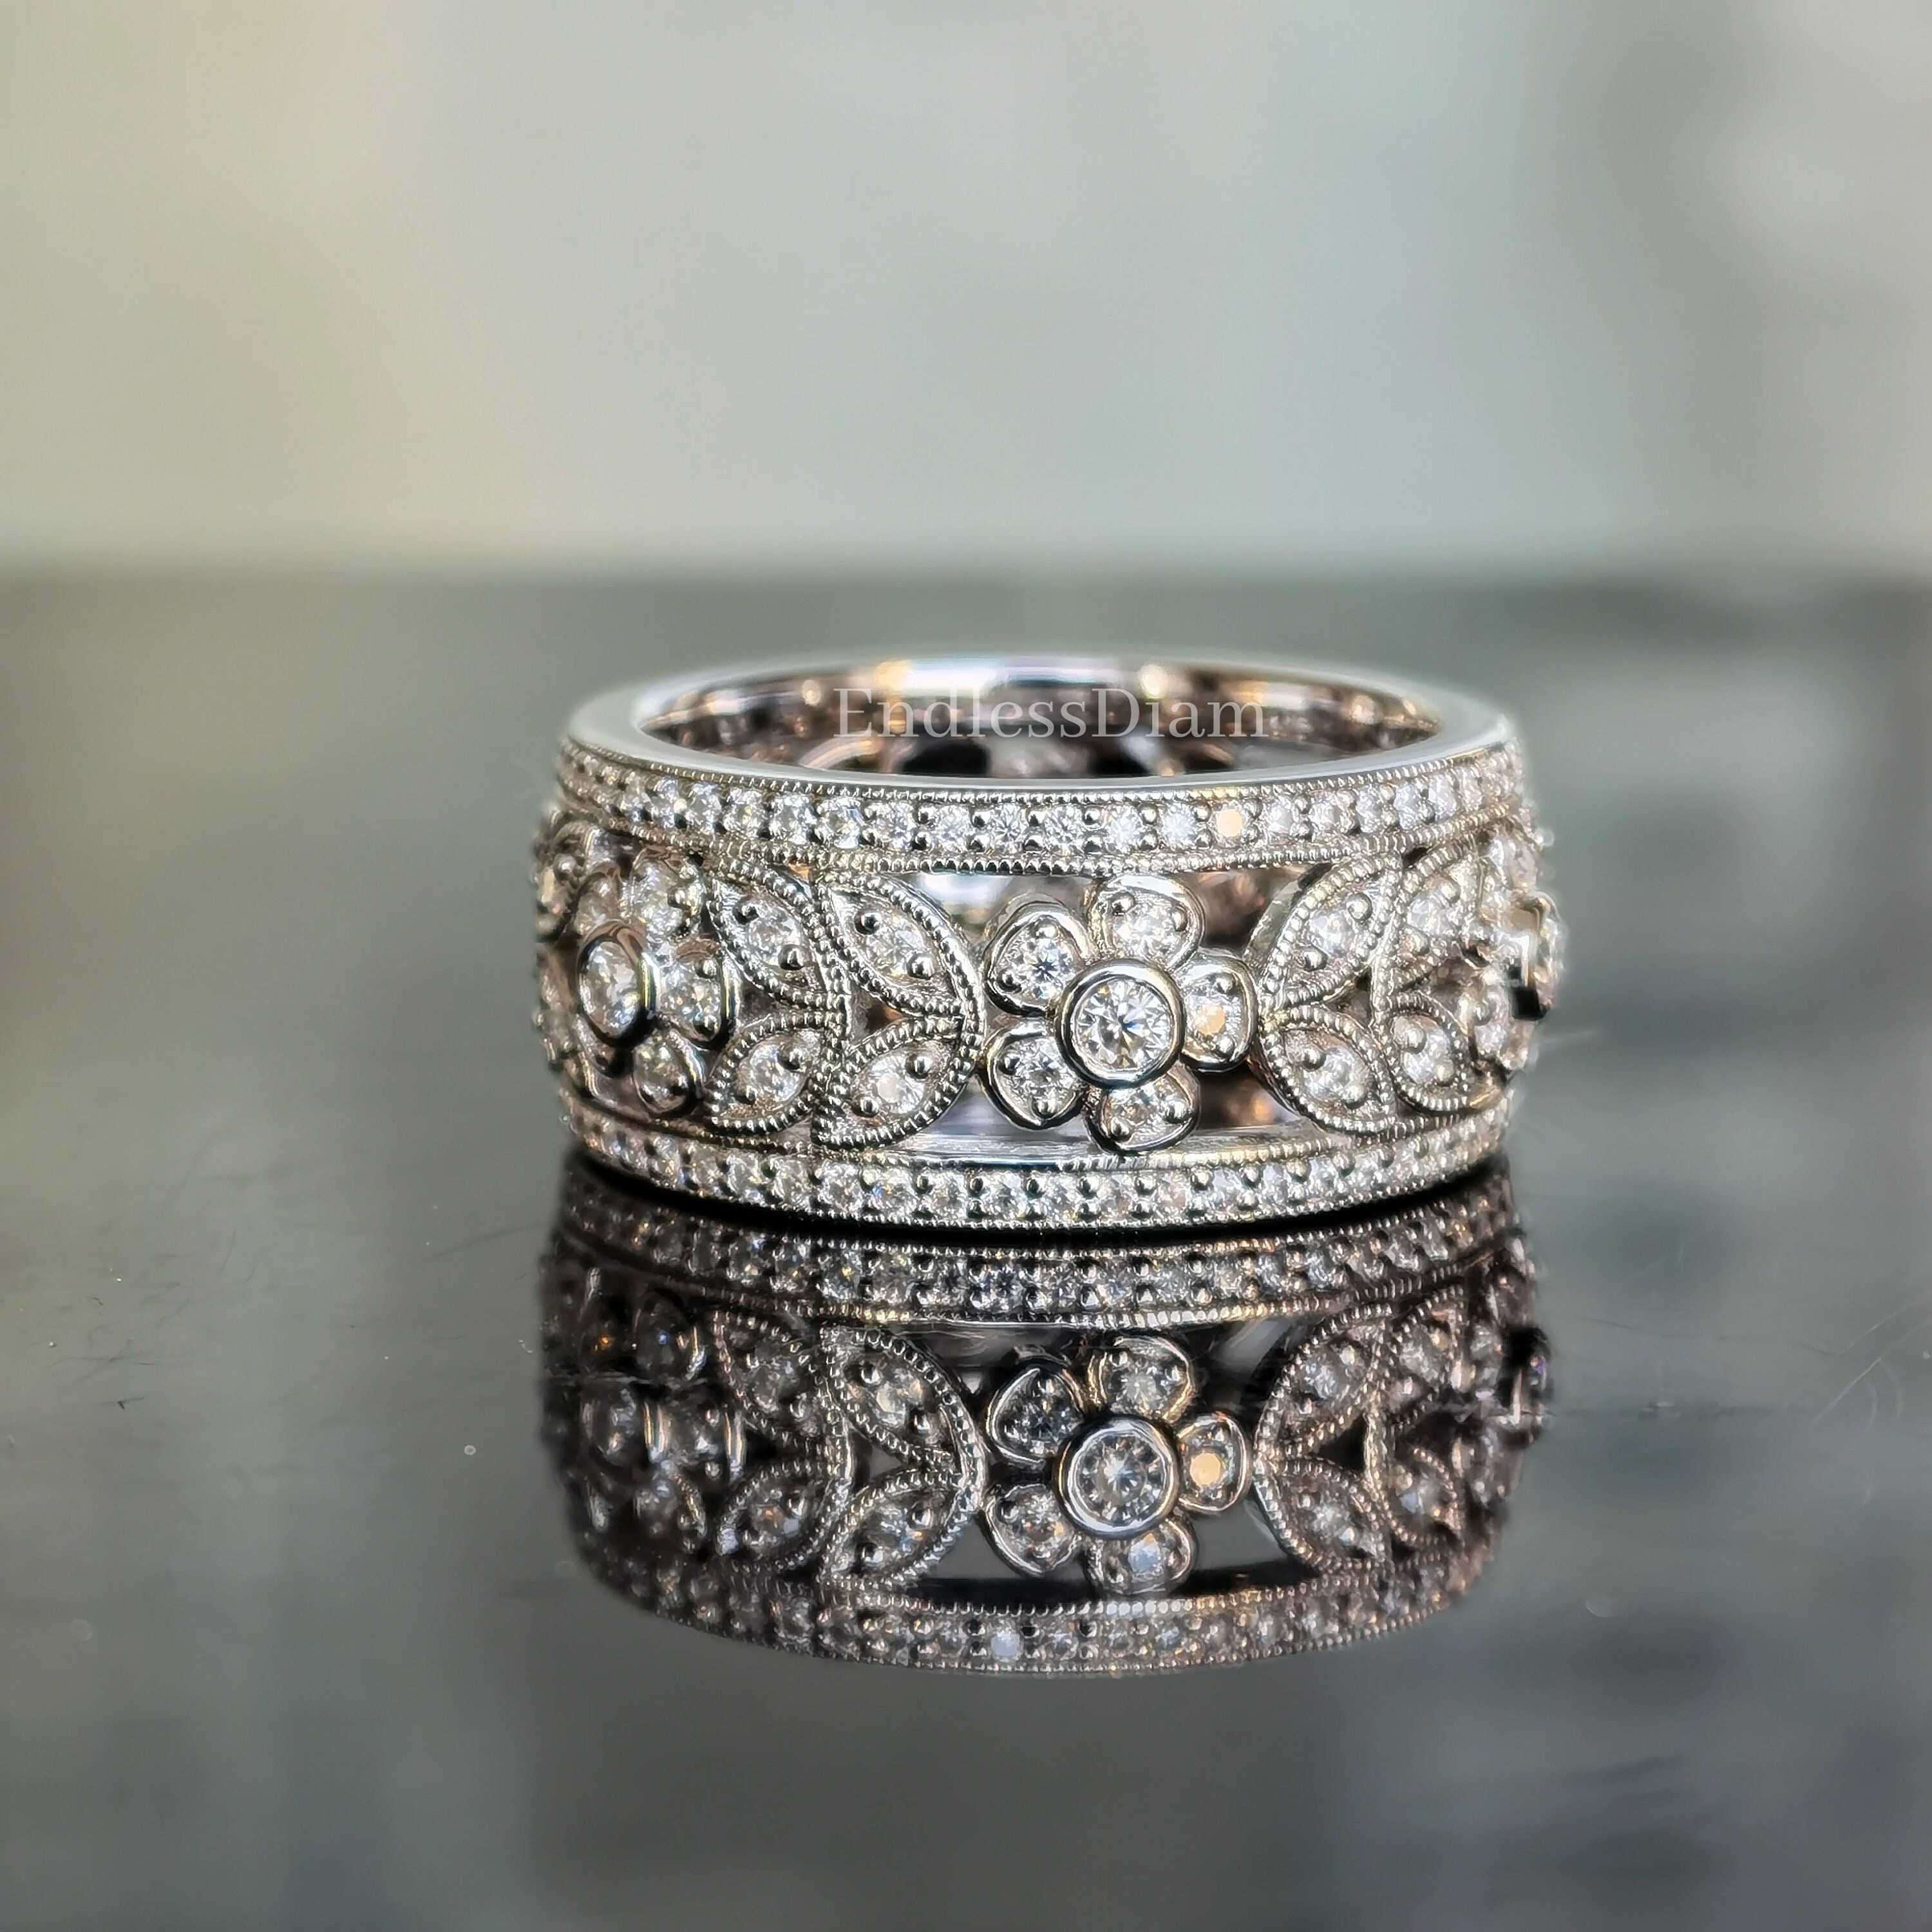 Unique Wide Band Engagement Rings For Every Style | Brinker's Jewelers